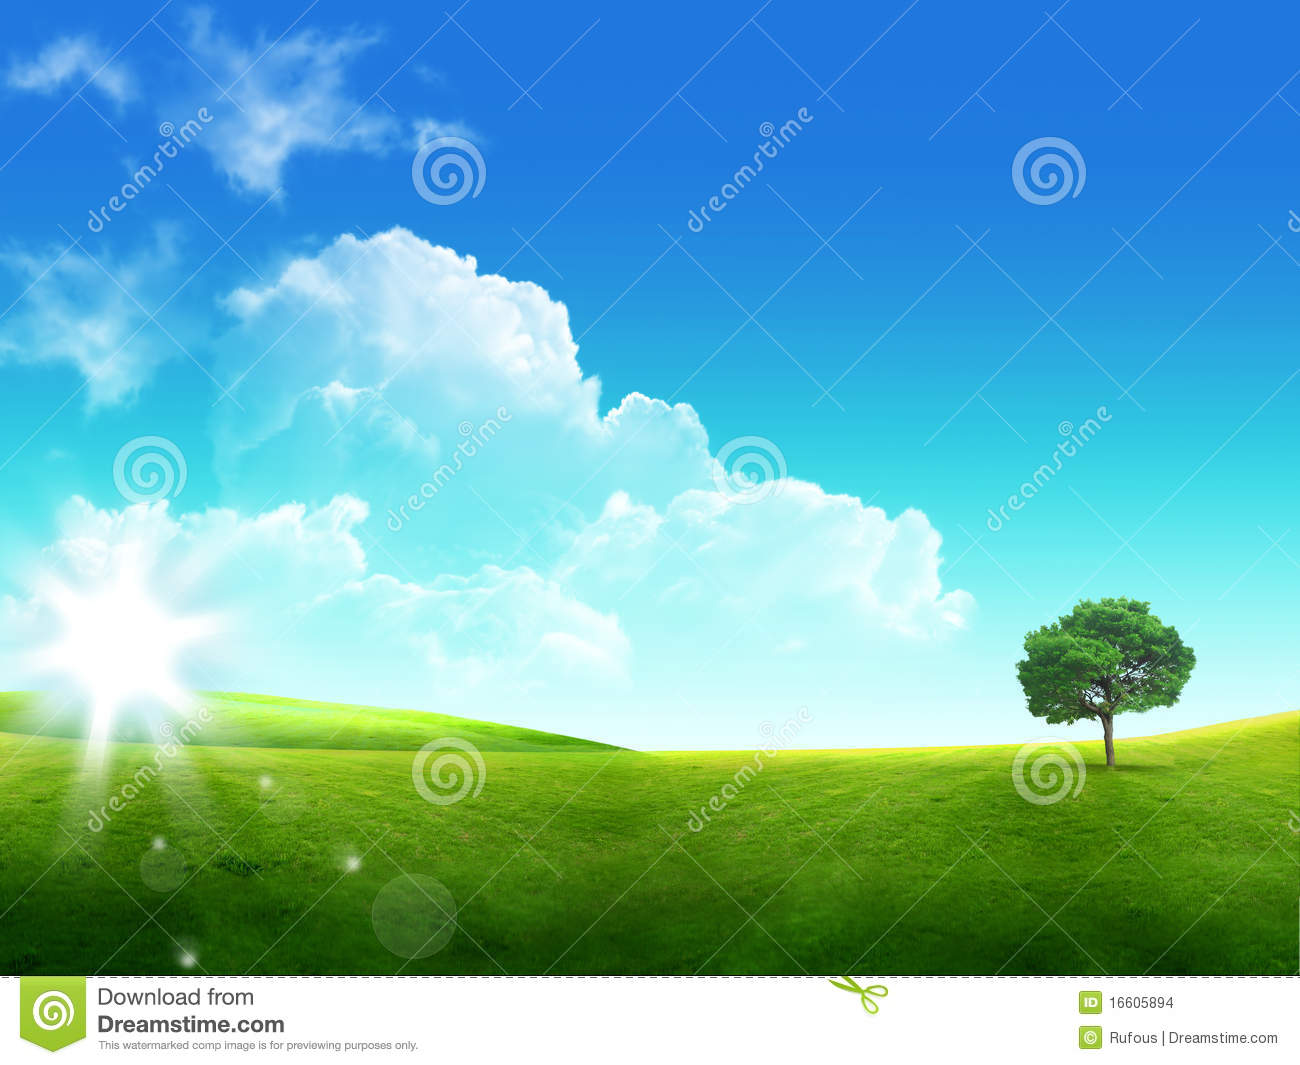 Green Grass And Blue Sky With Clouds And Tree Stock Images   Image